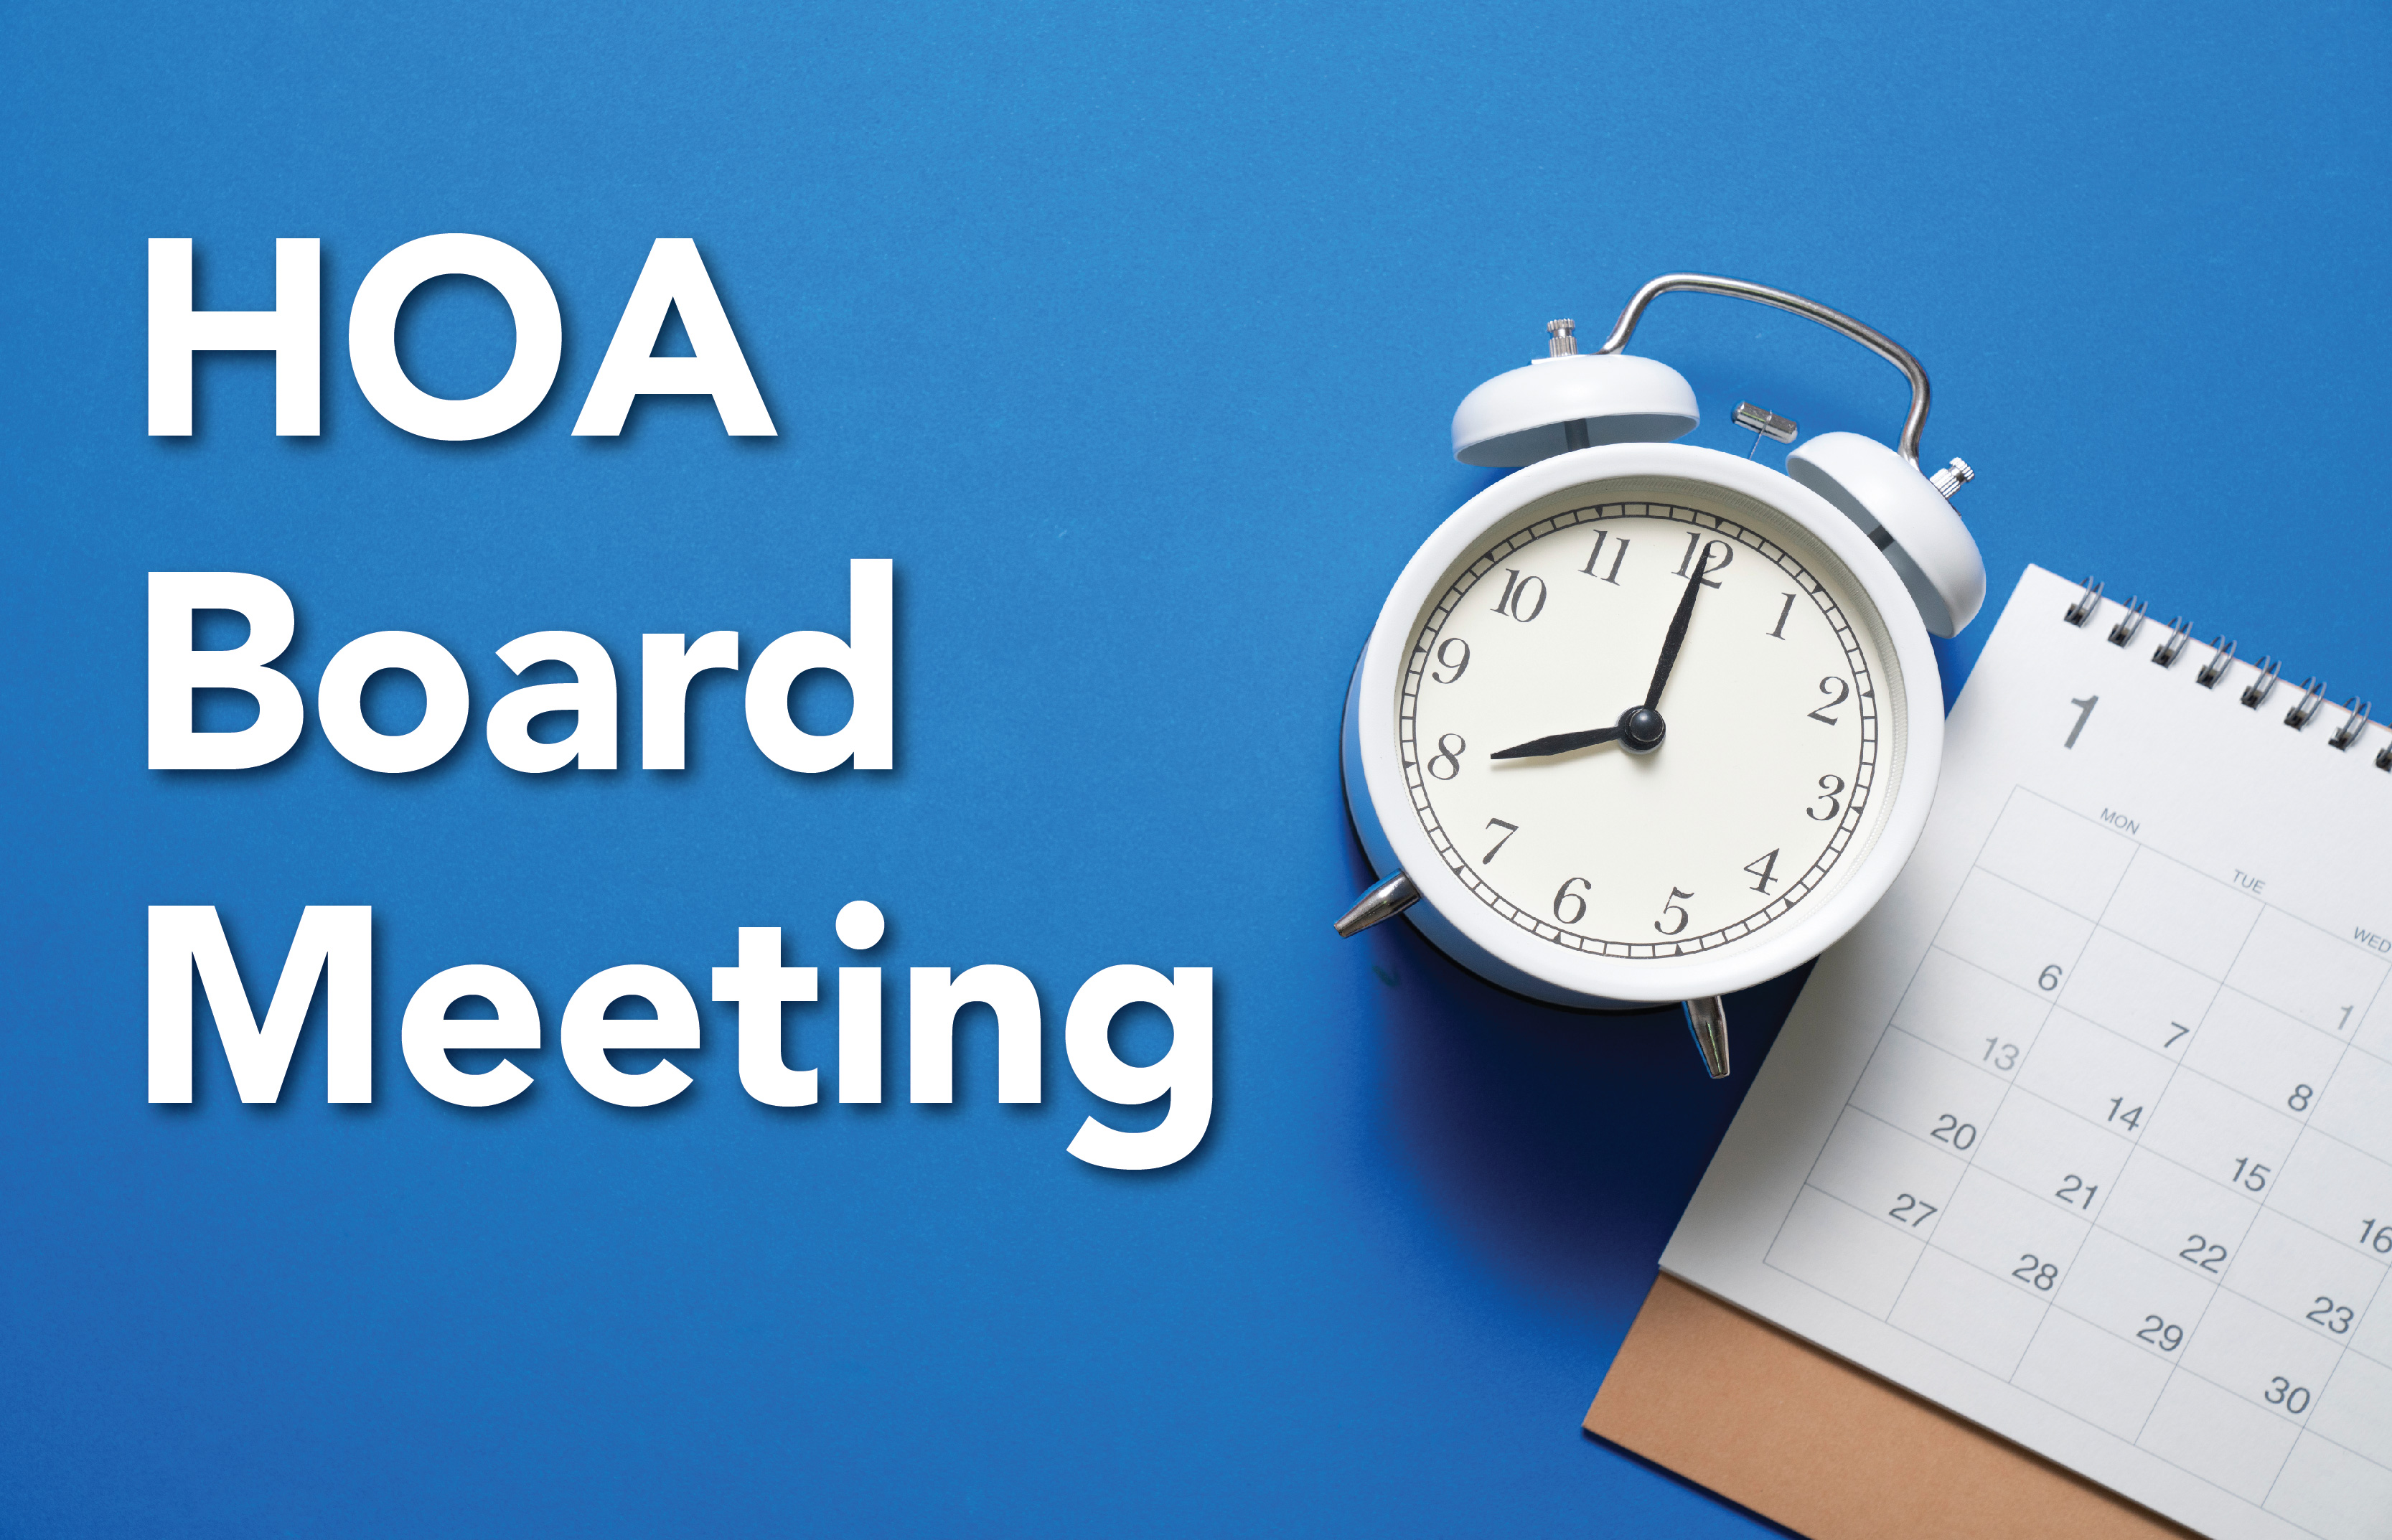 Sheffield HOA Meeting Set for March 25